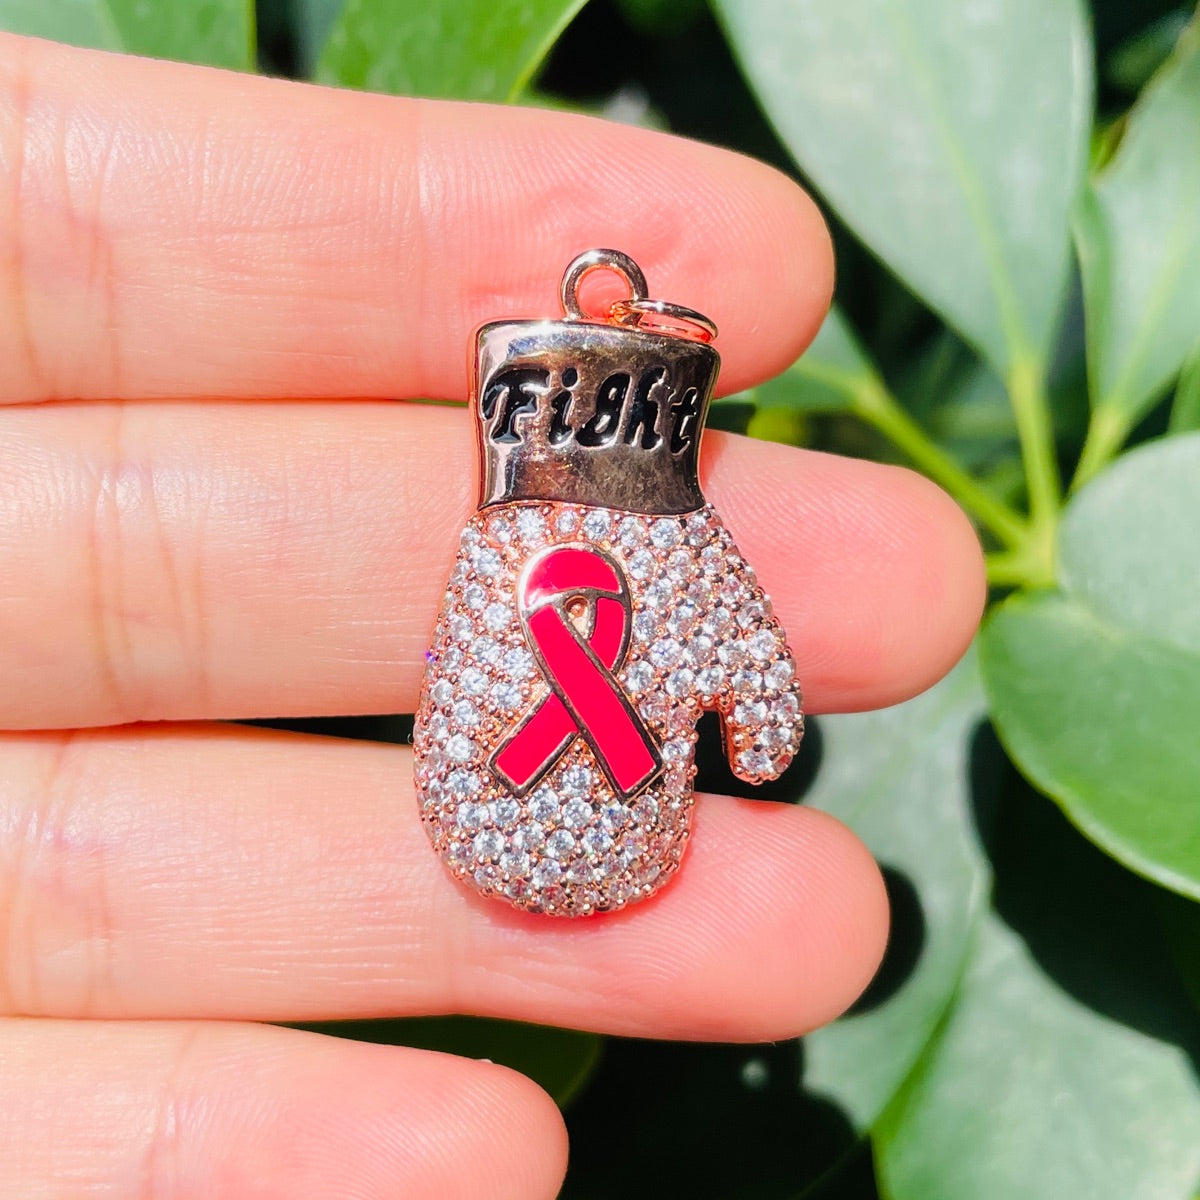 10pcs/lot CZ Pave Pink Ribbon Fight Gloves Charms - Breast Cancer Awareness Rose Gold CZ Paved Charms Breast Cancer Awareness New Charms Arrivals Charms Beads Beyond